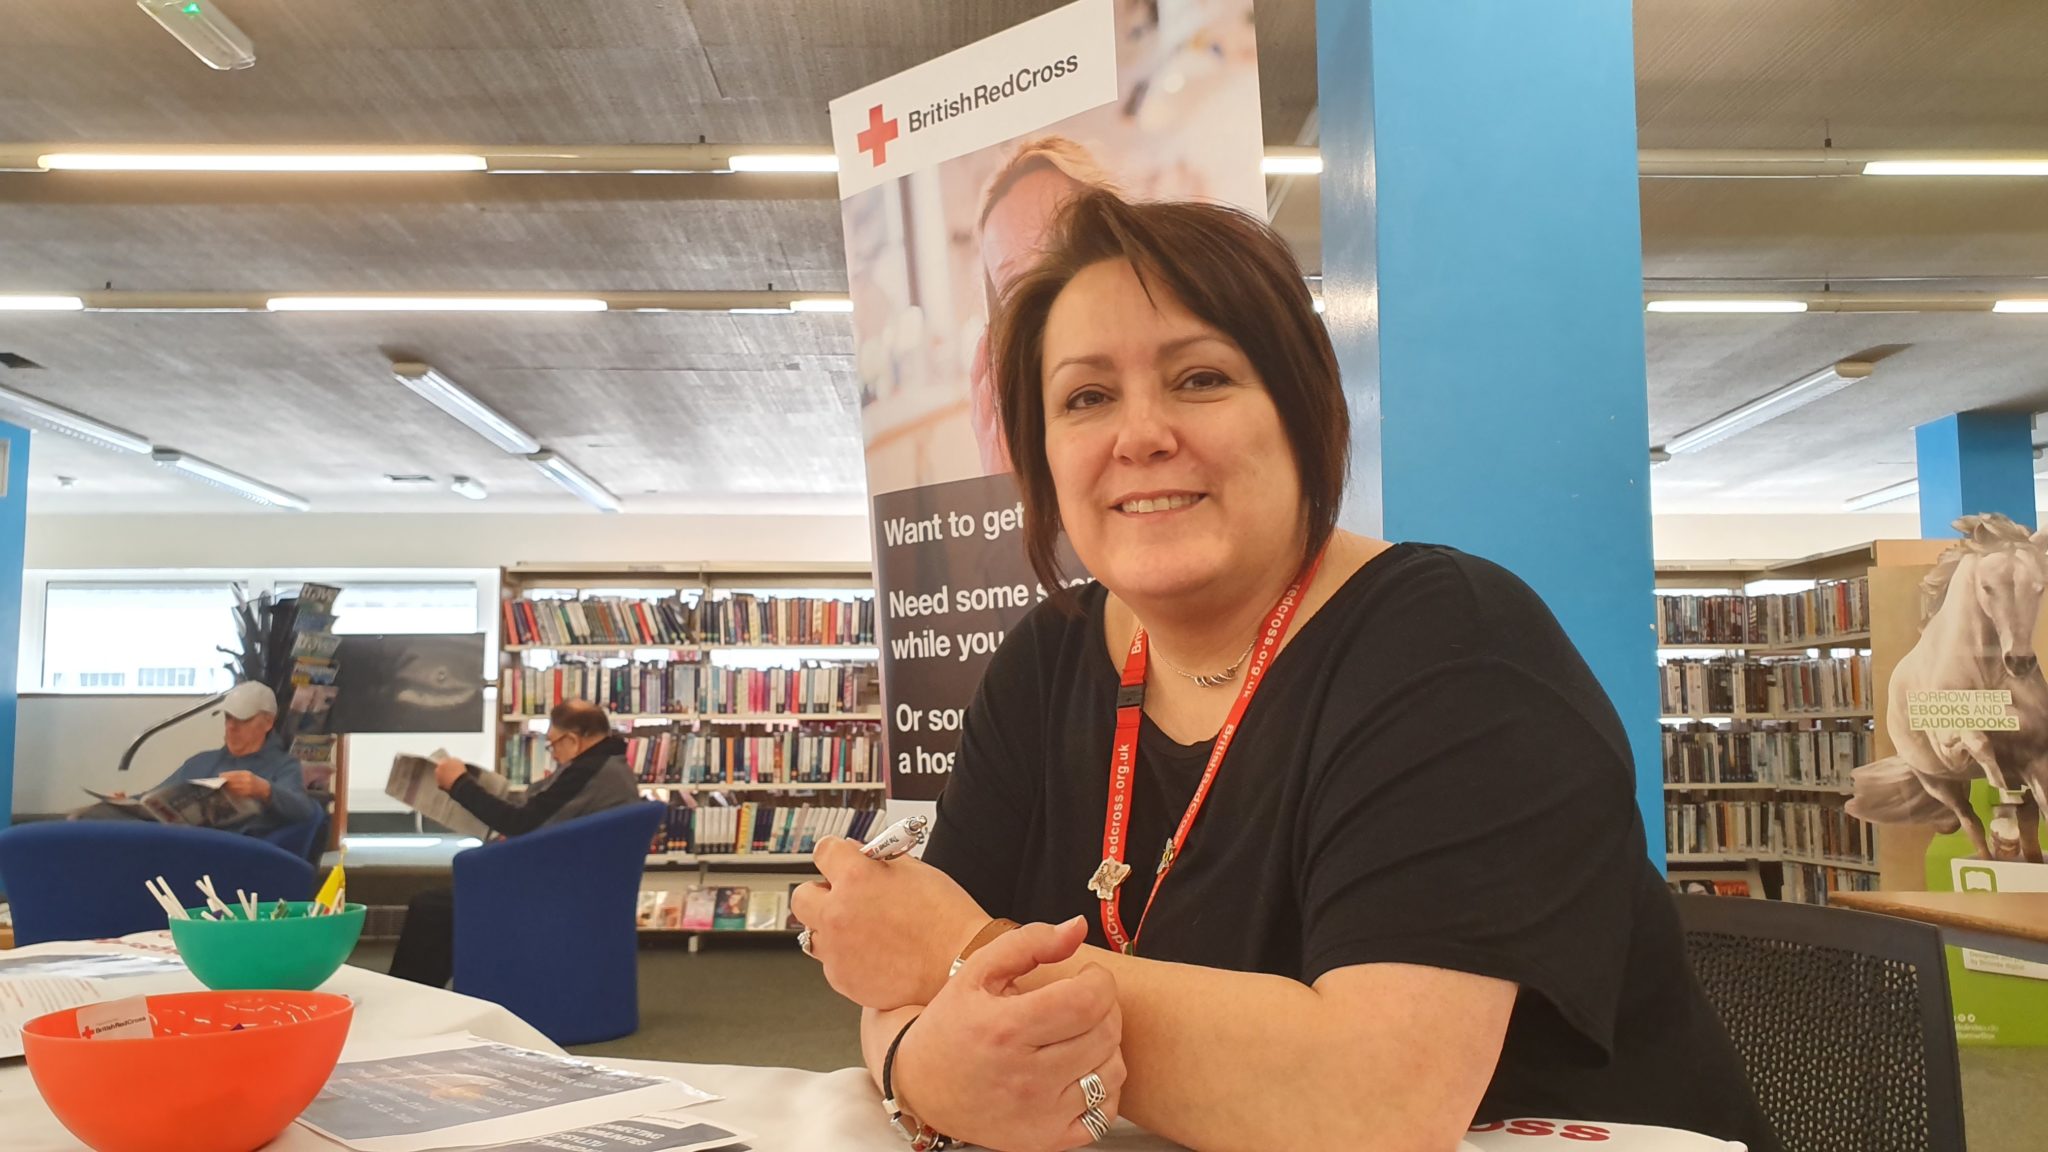 Suzanne Parry-Price, a community connector with the British Red Cross Community Connector